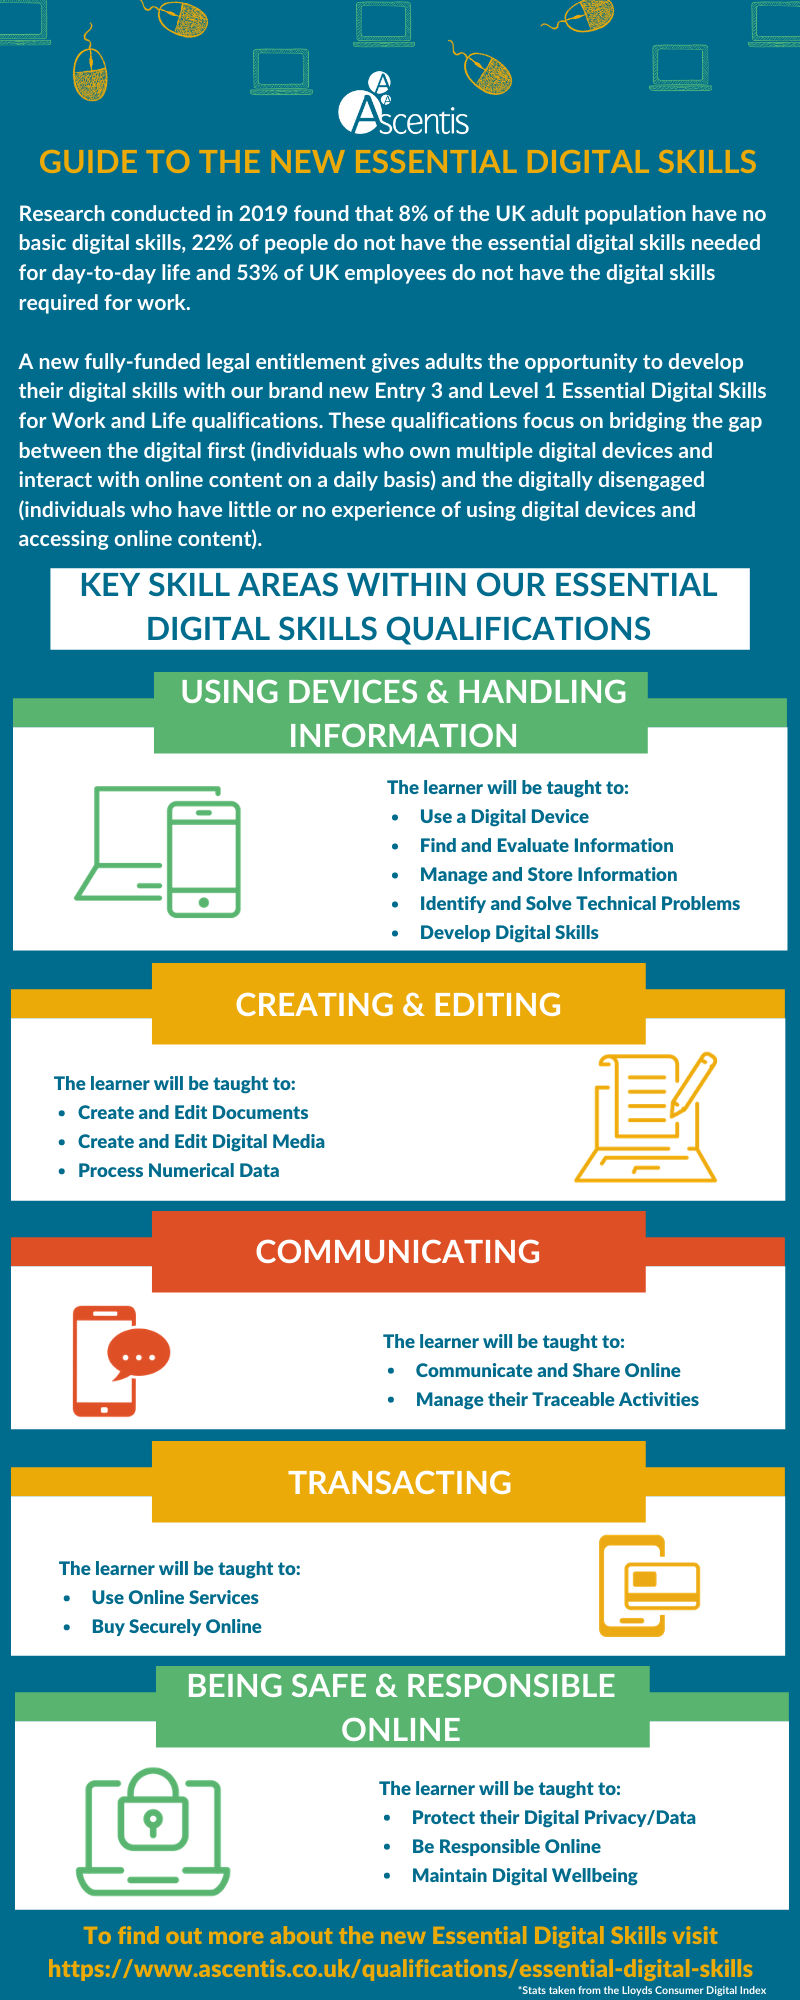 The Ascentis Guide to the new Essential Digital Skills